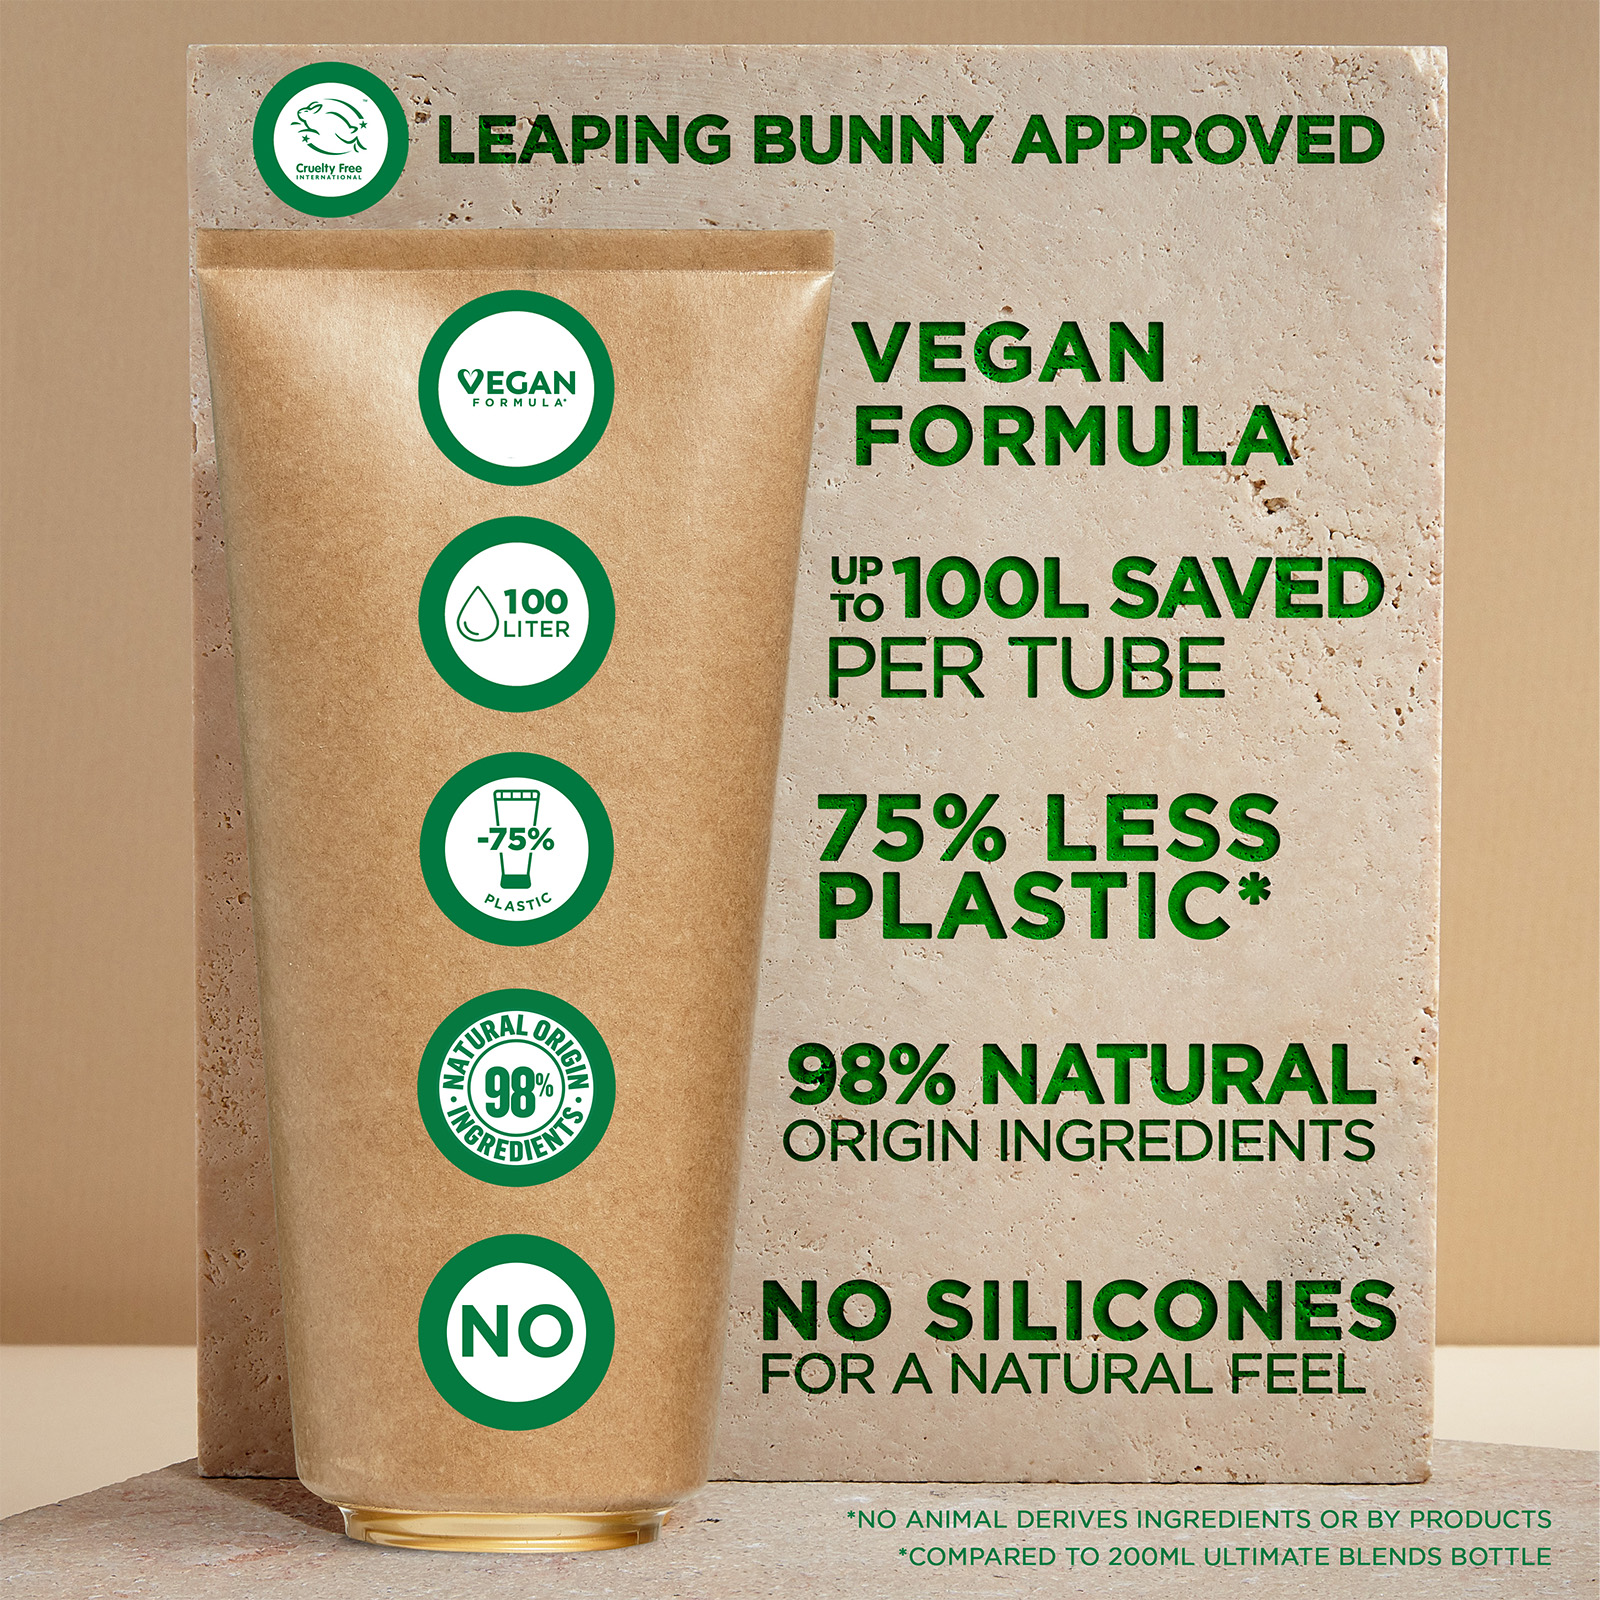 Text,Leaping Bunny Approved,Cruelty Free,Vegan Vegan Formula, up to Formula 100 Liter Saved Per Tube,75% Less Plastic*,98% Natural Origin Ingredients,No Silicones For A Natural Feel,*No Animal Derives Ingredients Or By Products,*Compared To 200Ml Ultimate Blends Bottle